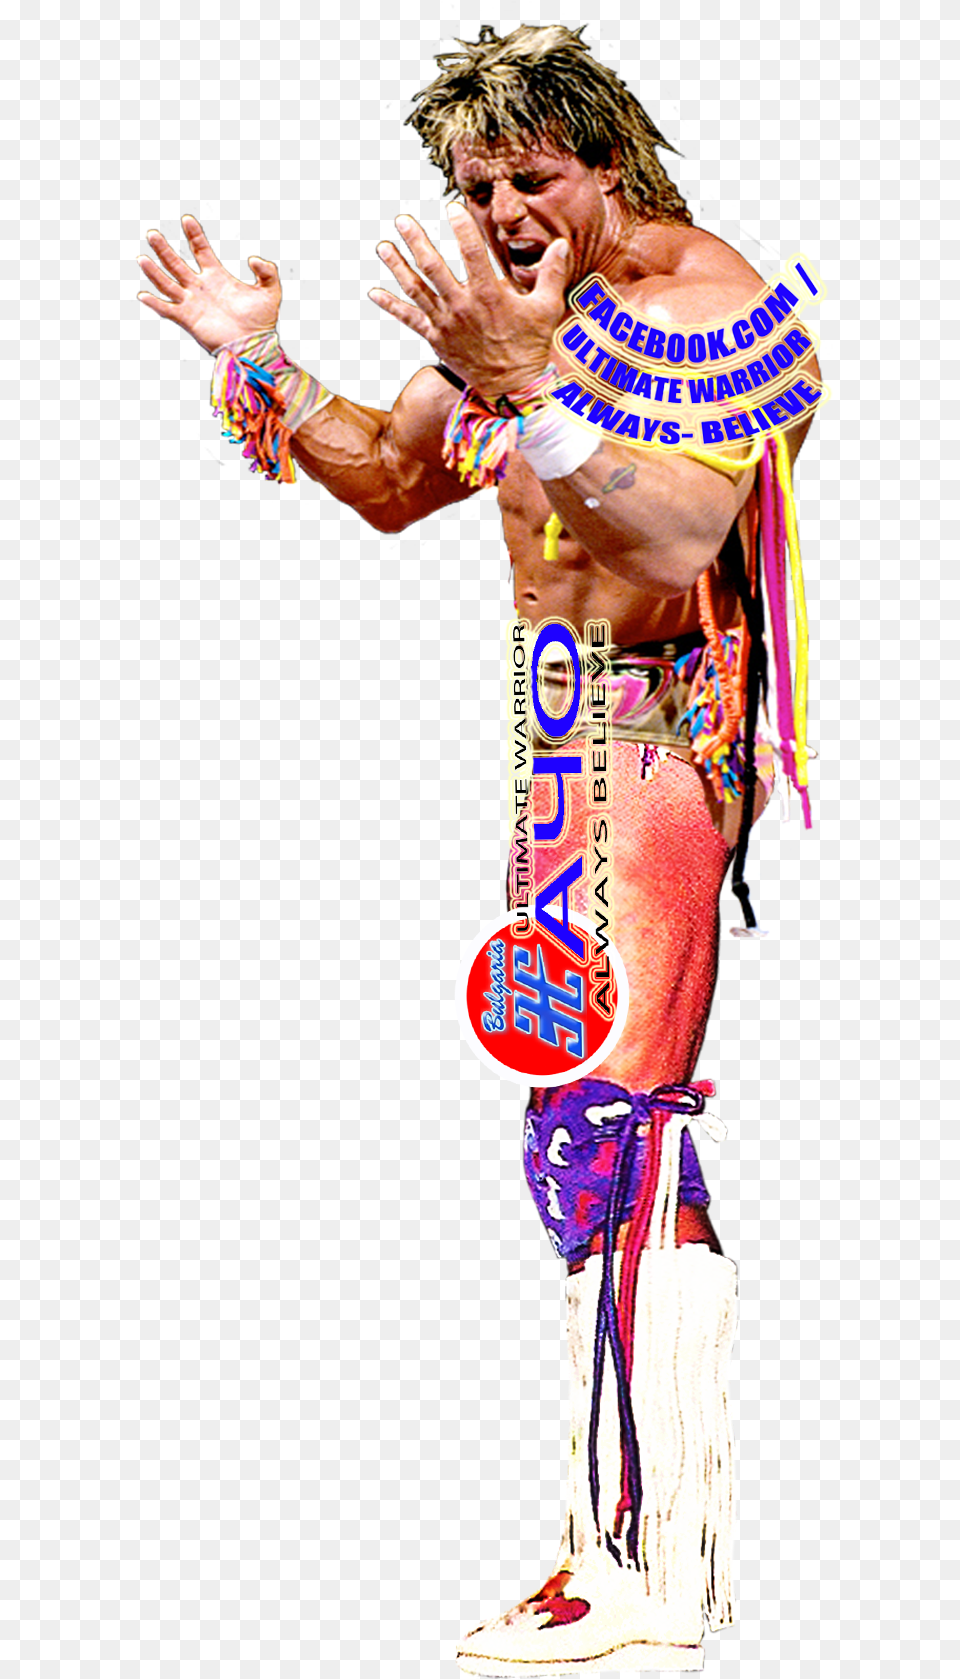 Naidenwarrior Na4o76 On Twitter Ultimate Warrior You Are Dance, Finger, Body Part, Person, Hand Free Png Download